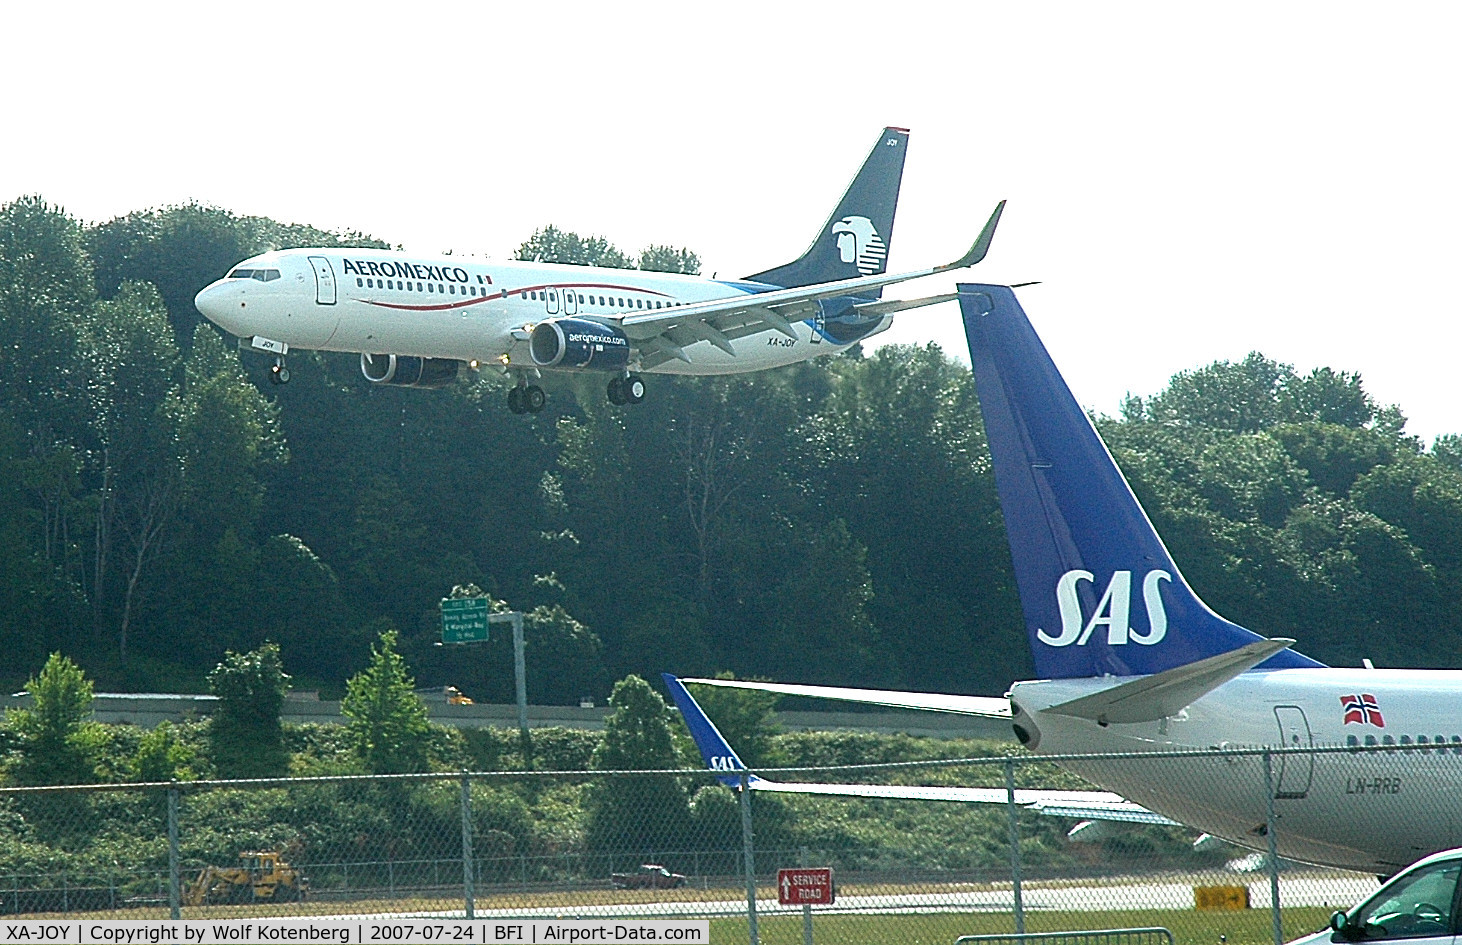 XA-JOY, 2007 Boeing 737-852 C/N 35121-2327, seconds from touch-down at BOEING Field, in Seattle, WA